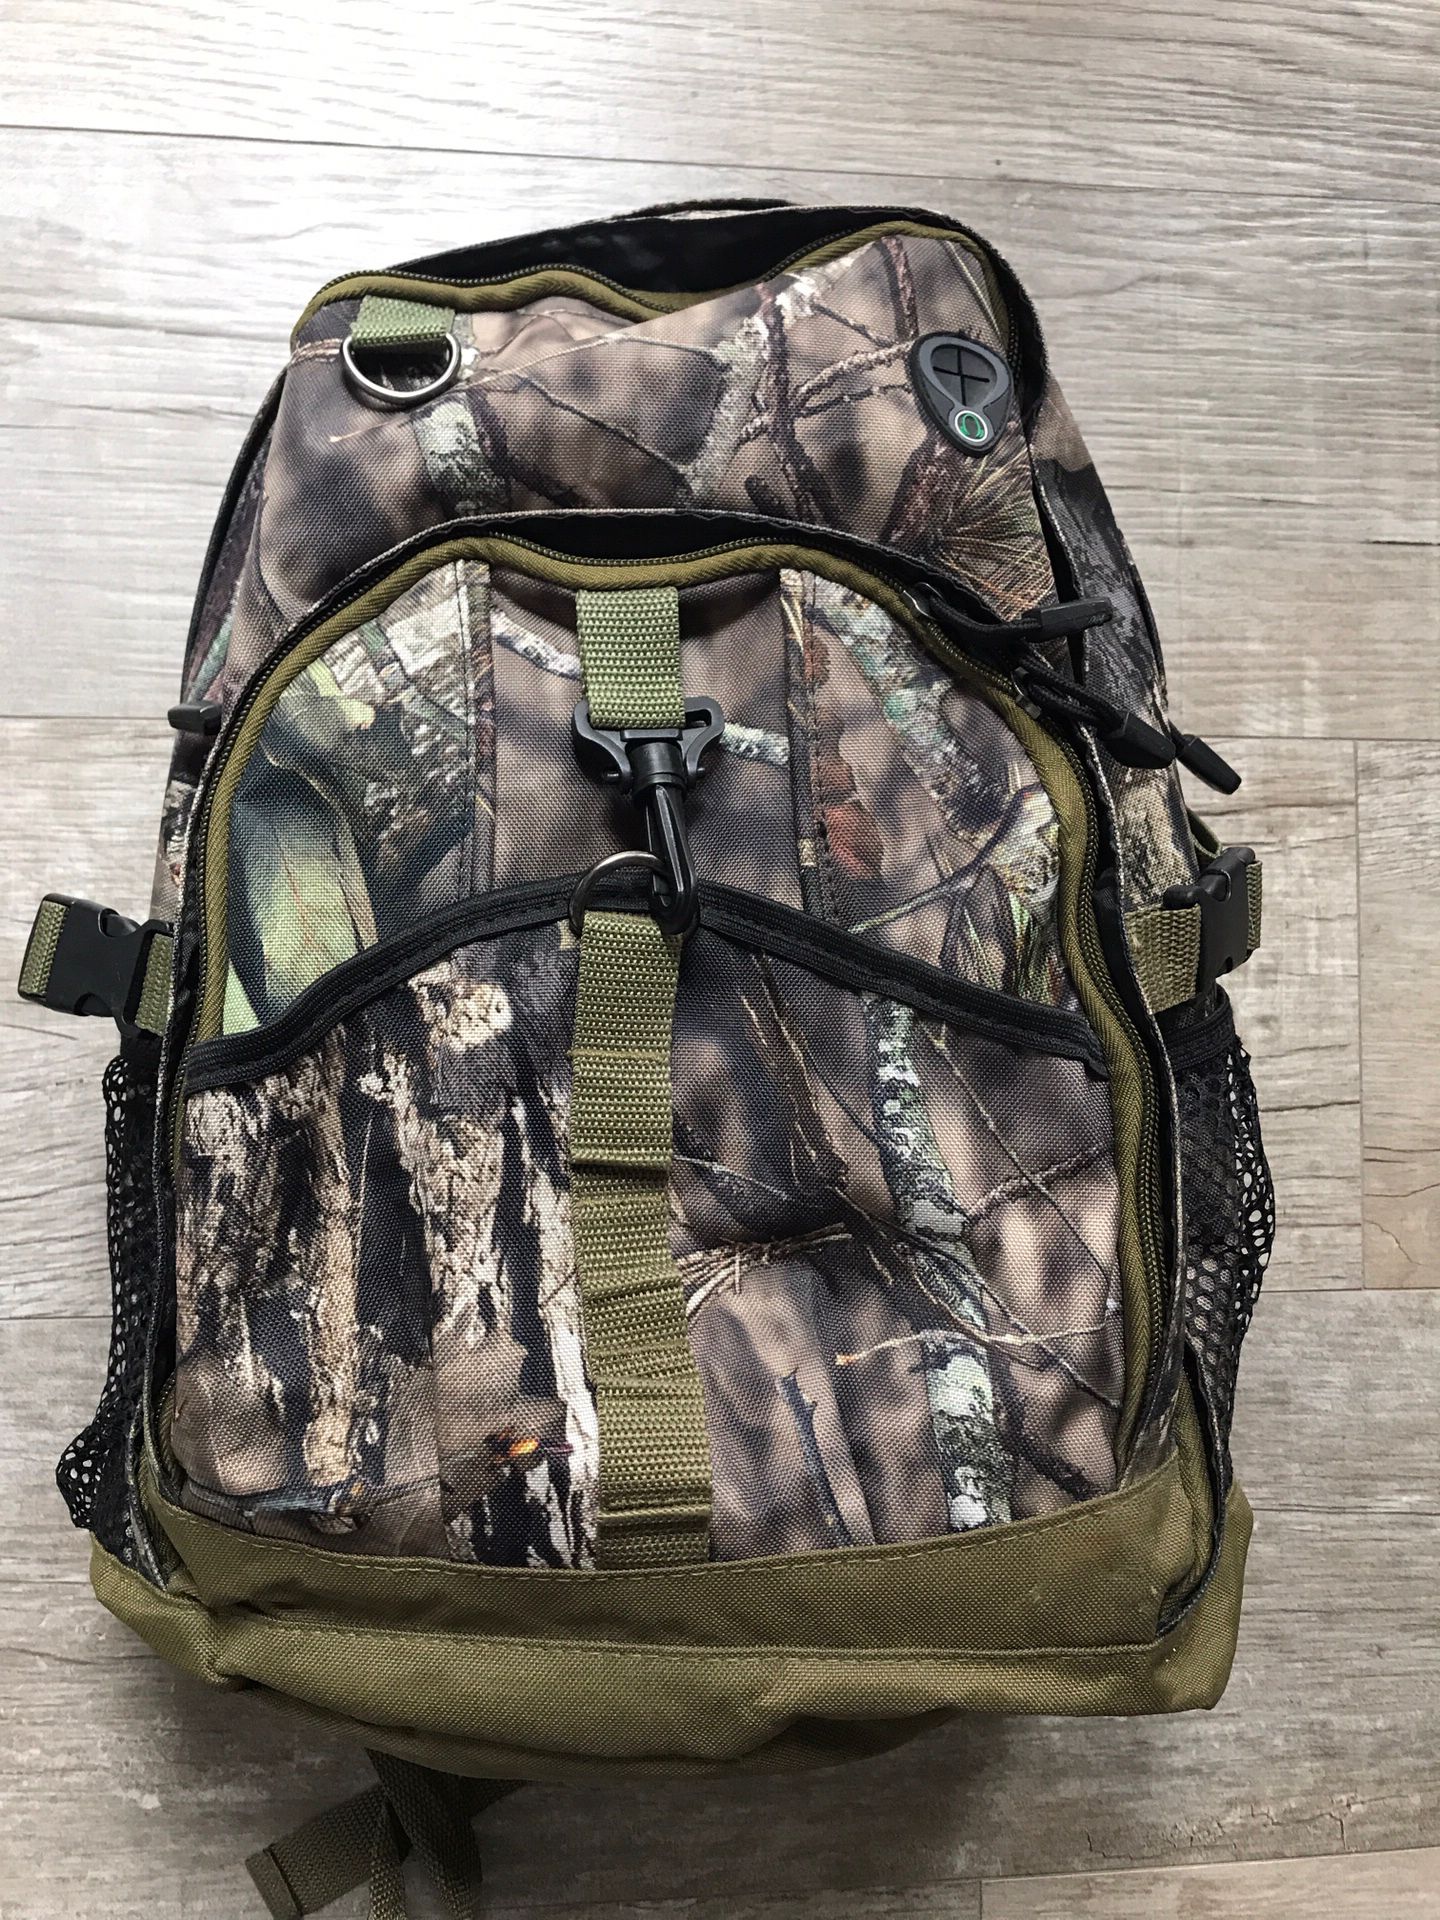 Camo Backpack Hiking Camping Outdoors Men’s Camouflage Backpack